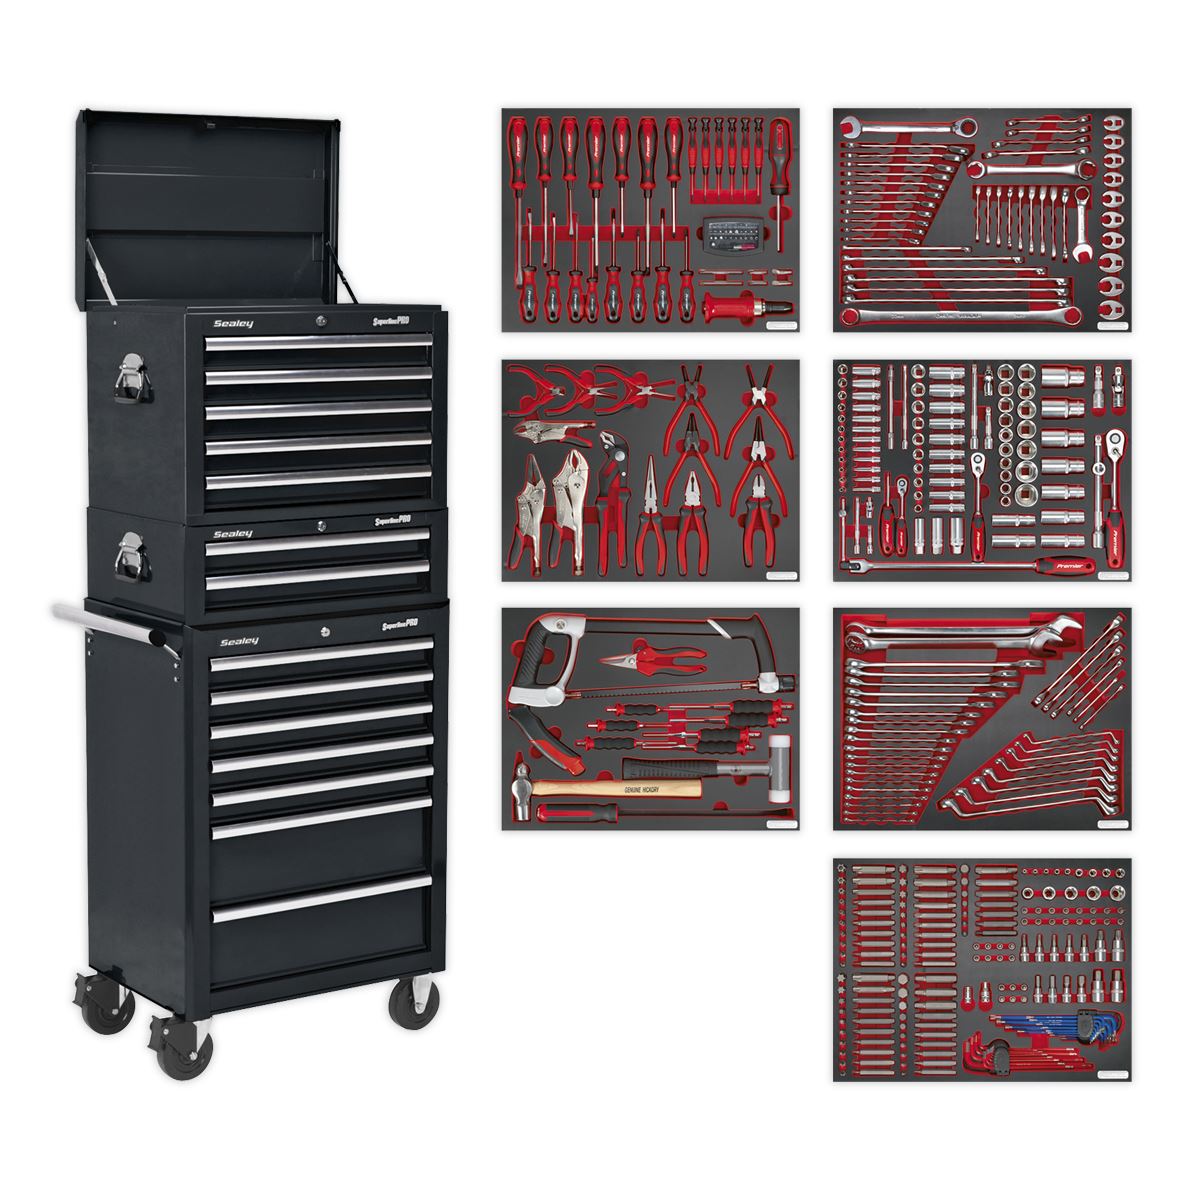 Sealey Superline Pro Tool Chest Combination 14 Drawer with Ball-Bearing Slides - Black & 446pc Tool Kit